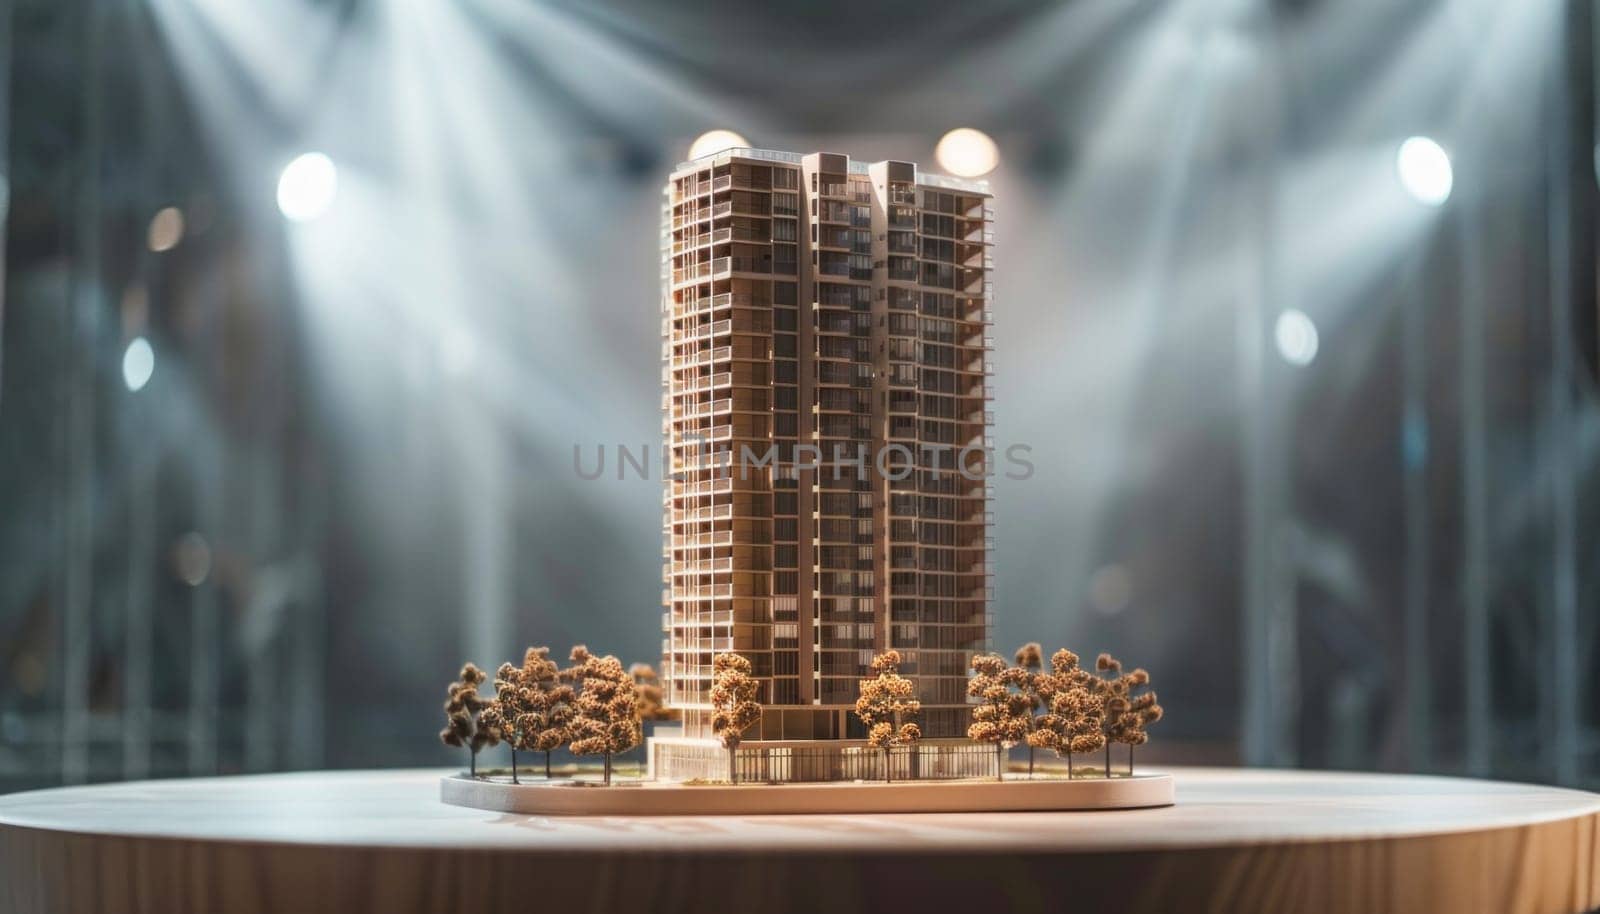 A model skyscraper is displayed on a wooden table, showcasing urban architecture and design elements